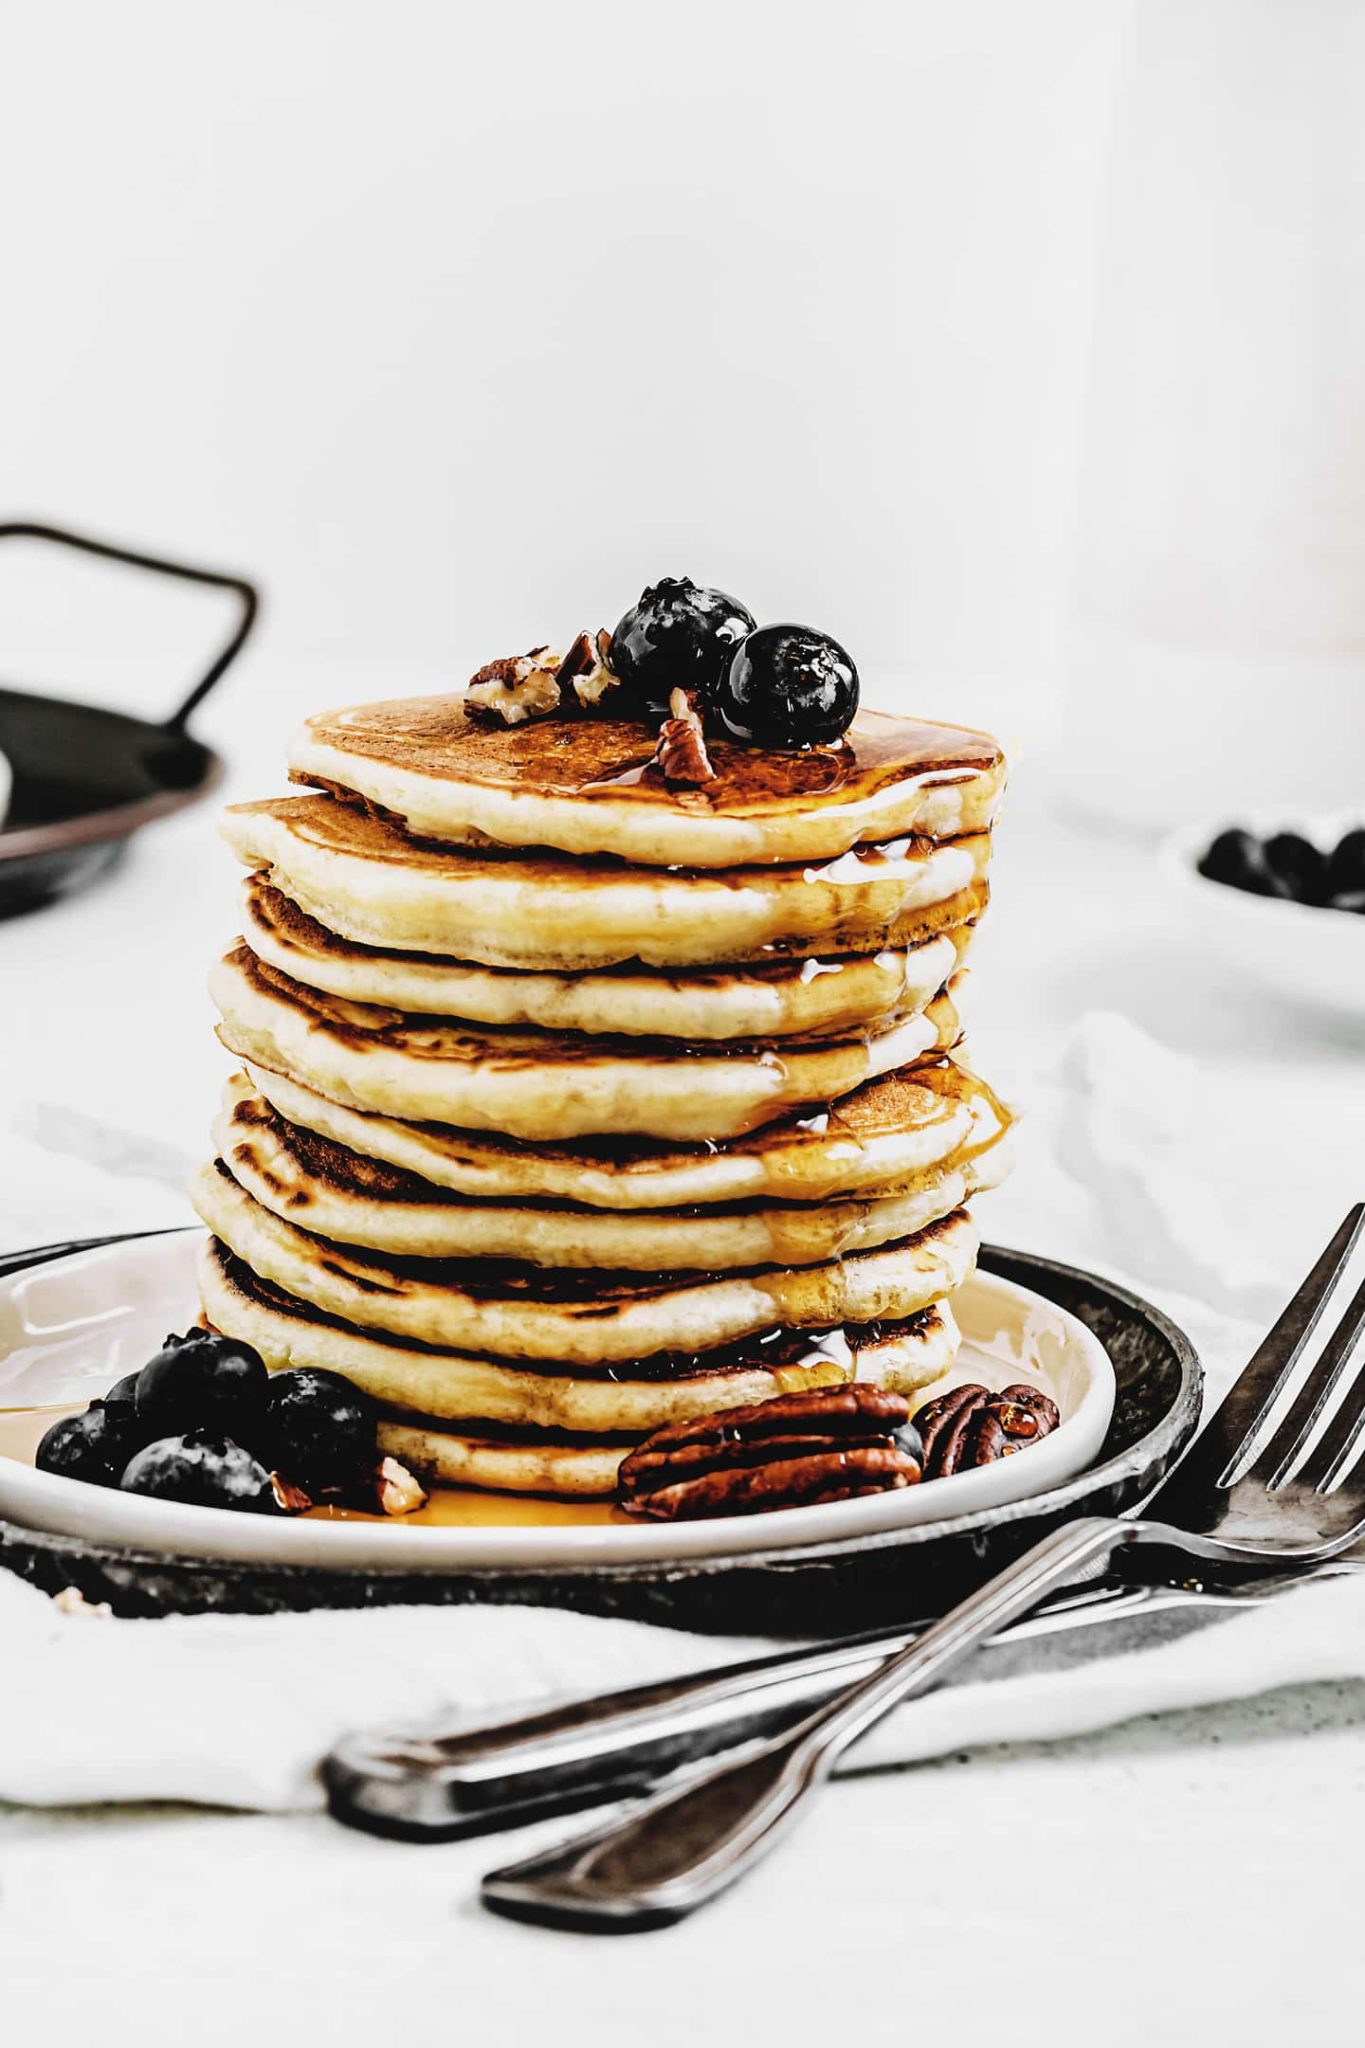 American Pancakes - Sweetly Cakes Fluffly and so fast to make